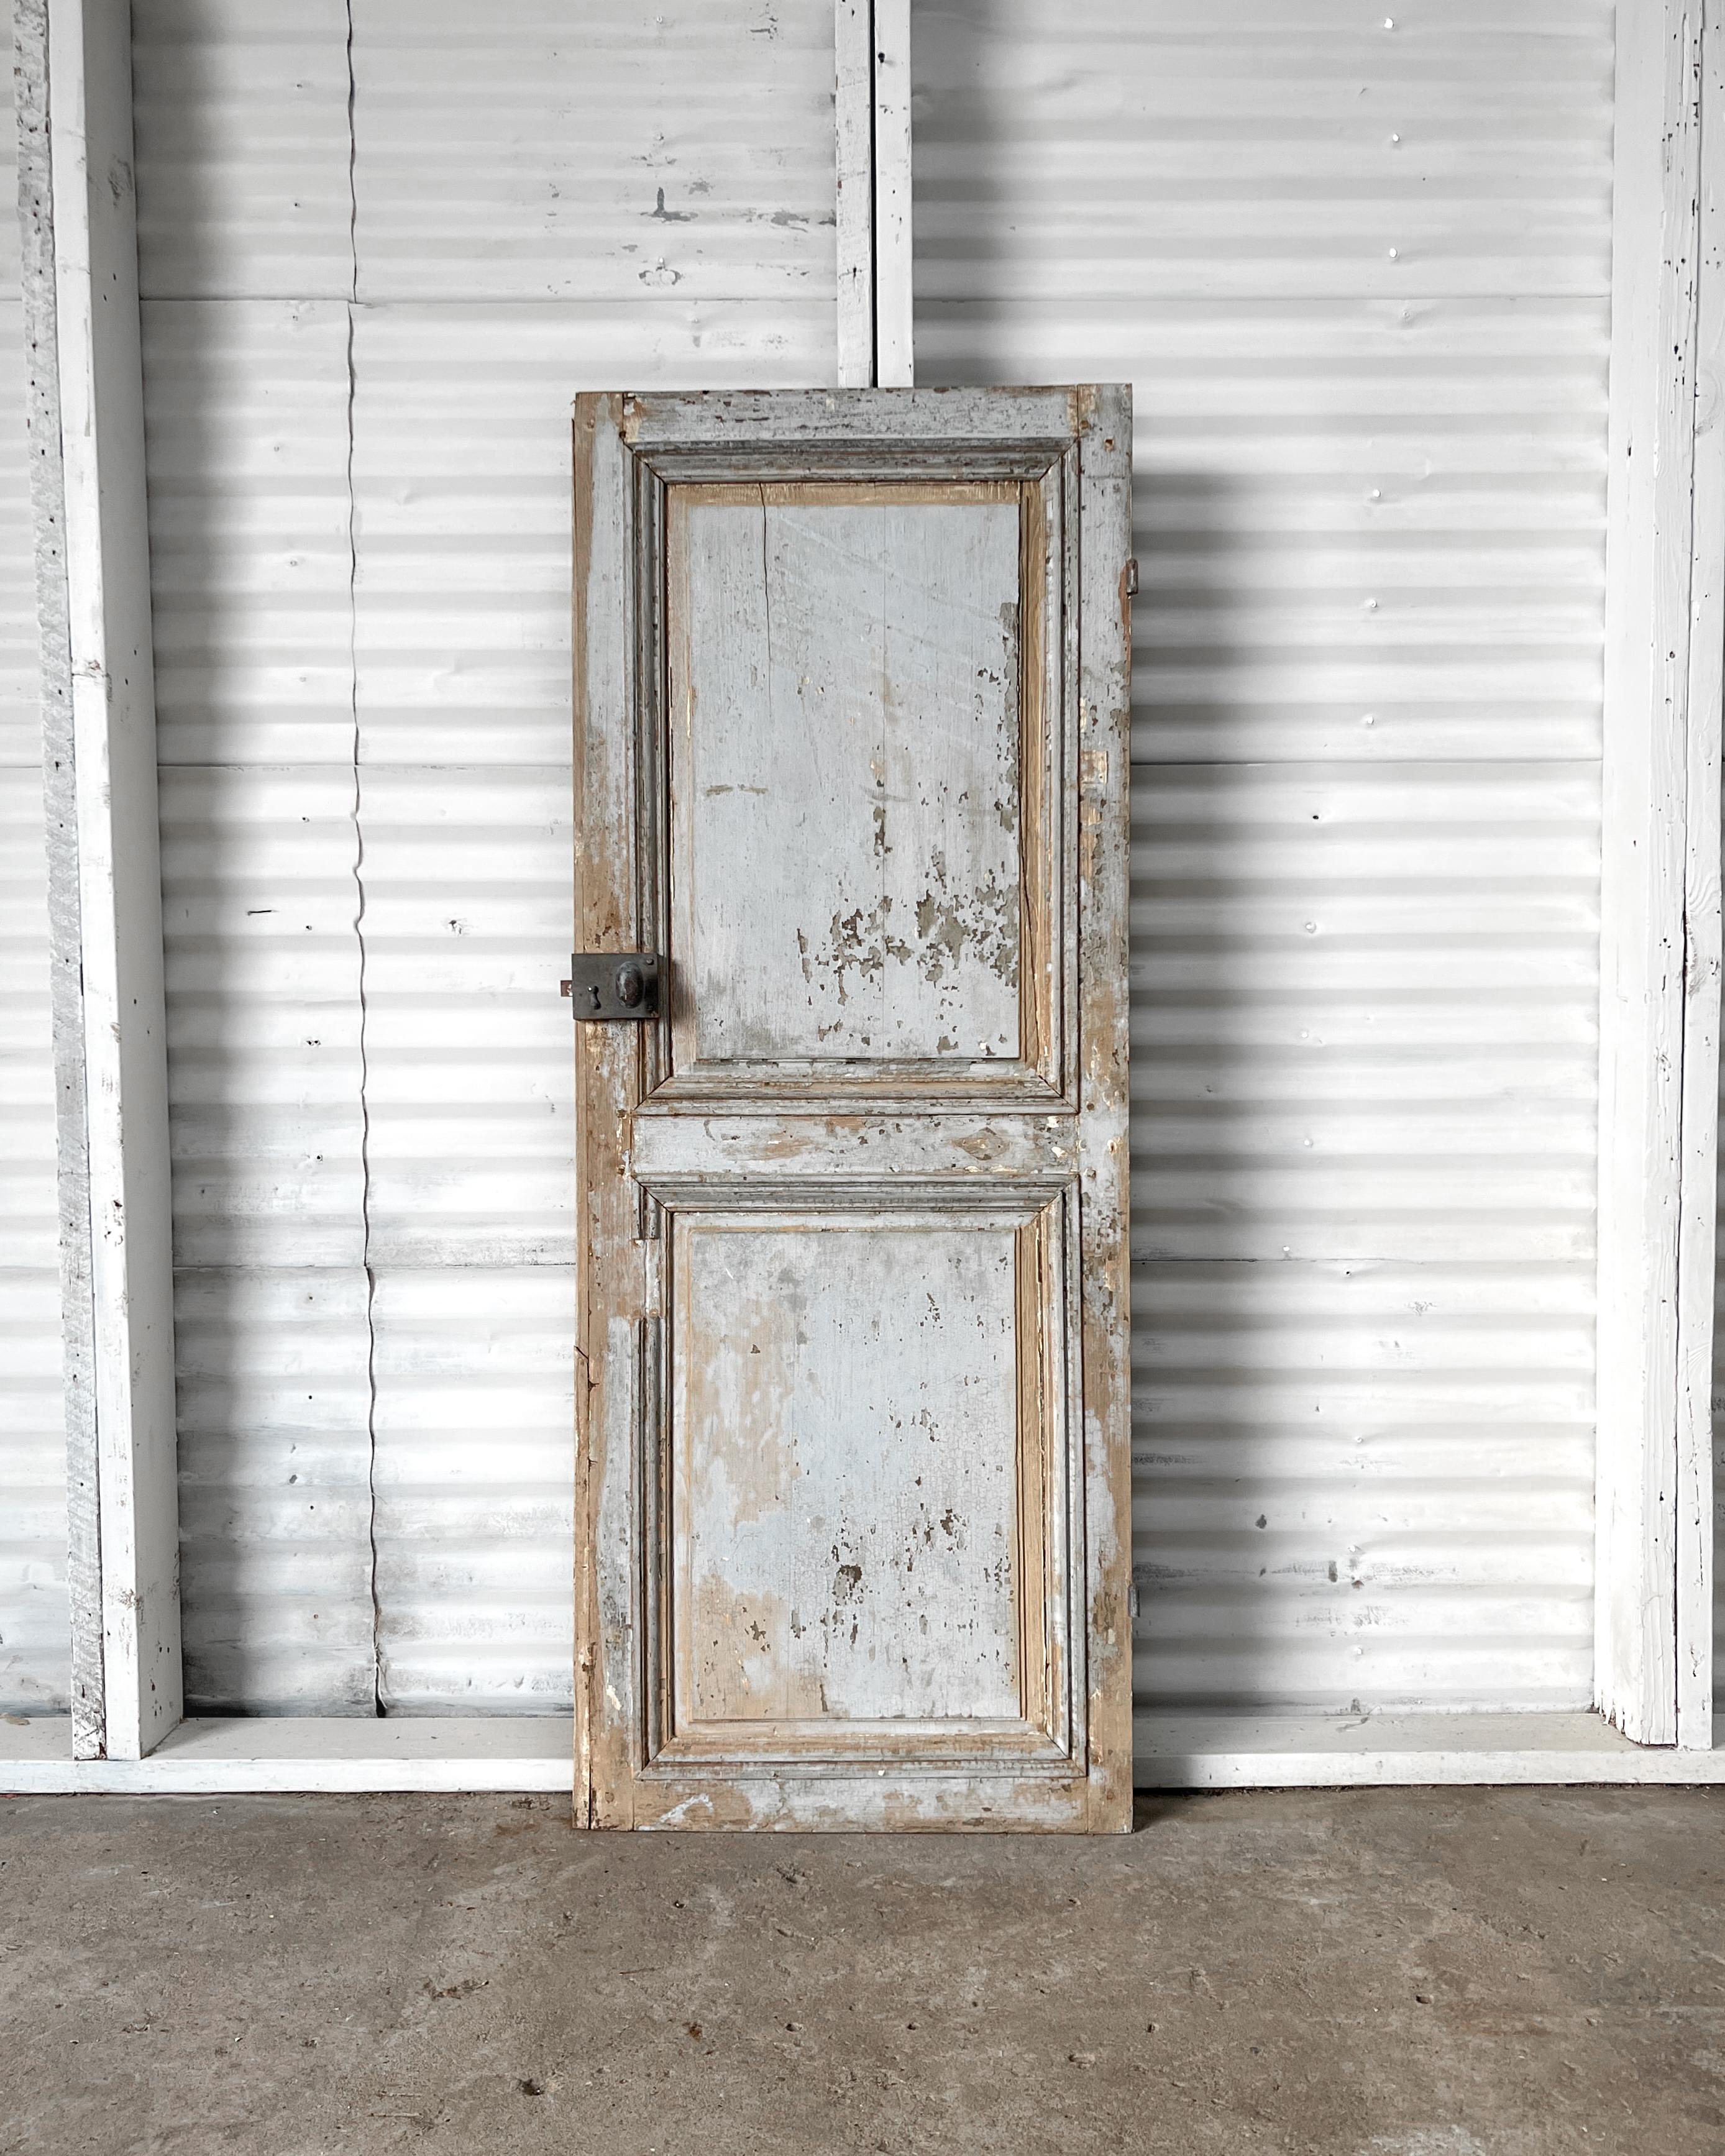 Once enclosing a storage space, this old 2-panel door was reclaimed from a home in the French countryside. Featuring raised panels with grooved and beveled trim detailing, the lovely weathered “French blue” paint will infuse your home with